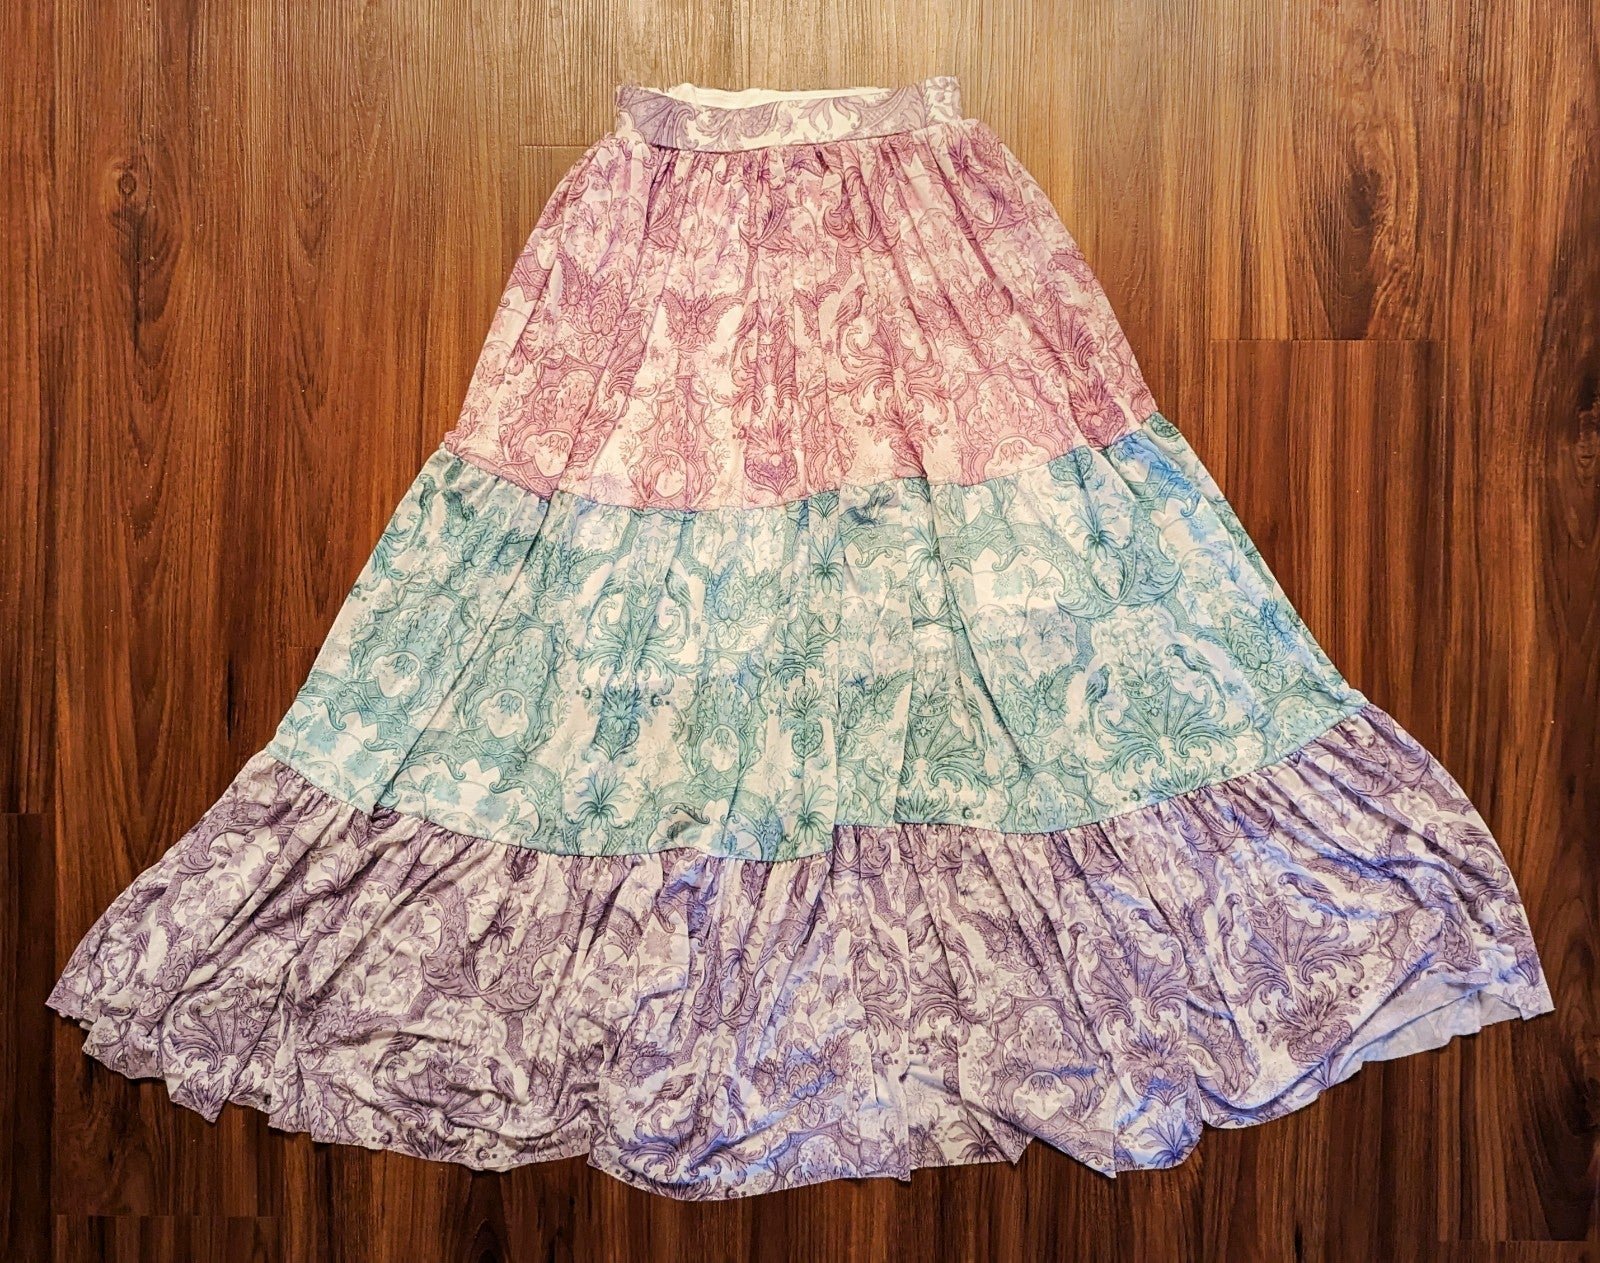 where to buy  BLACK MILK CHINOISERIE PASTEL TIER MIDAXI SKIRT SMALL - SAMPLE jxiA8iDvU just buy it